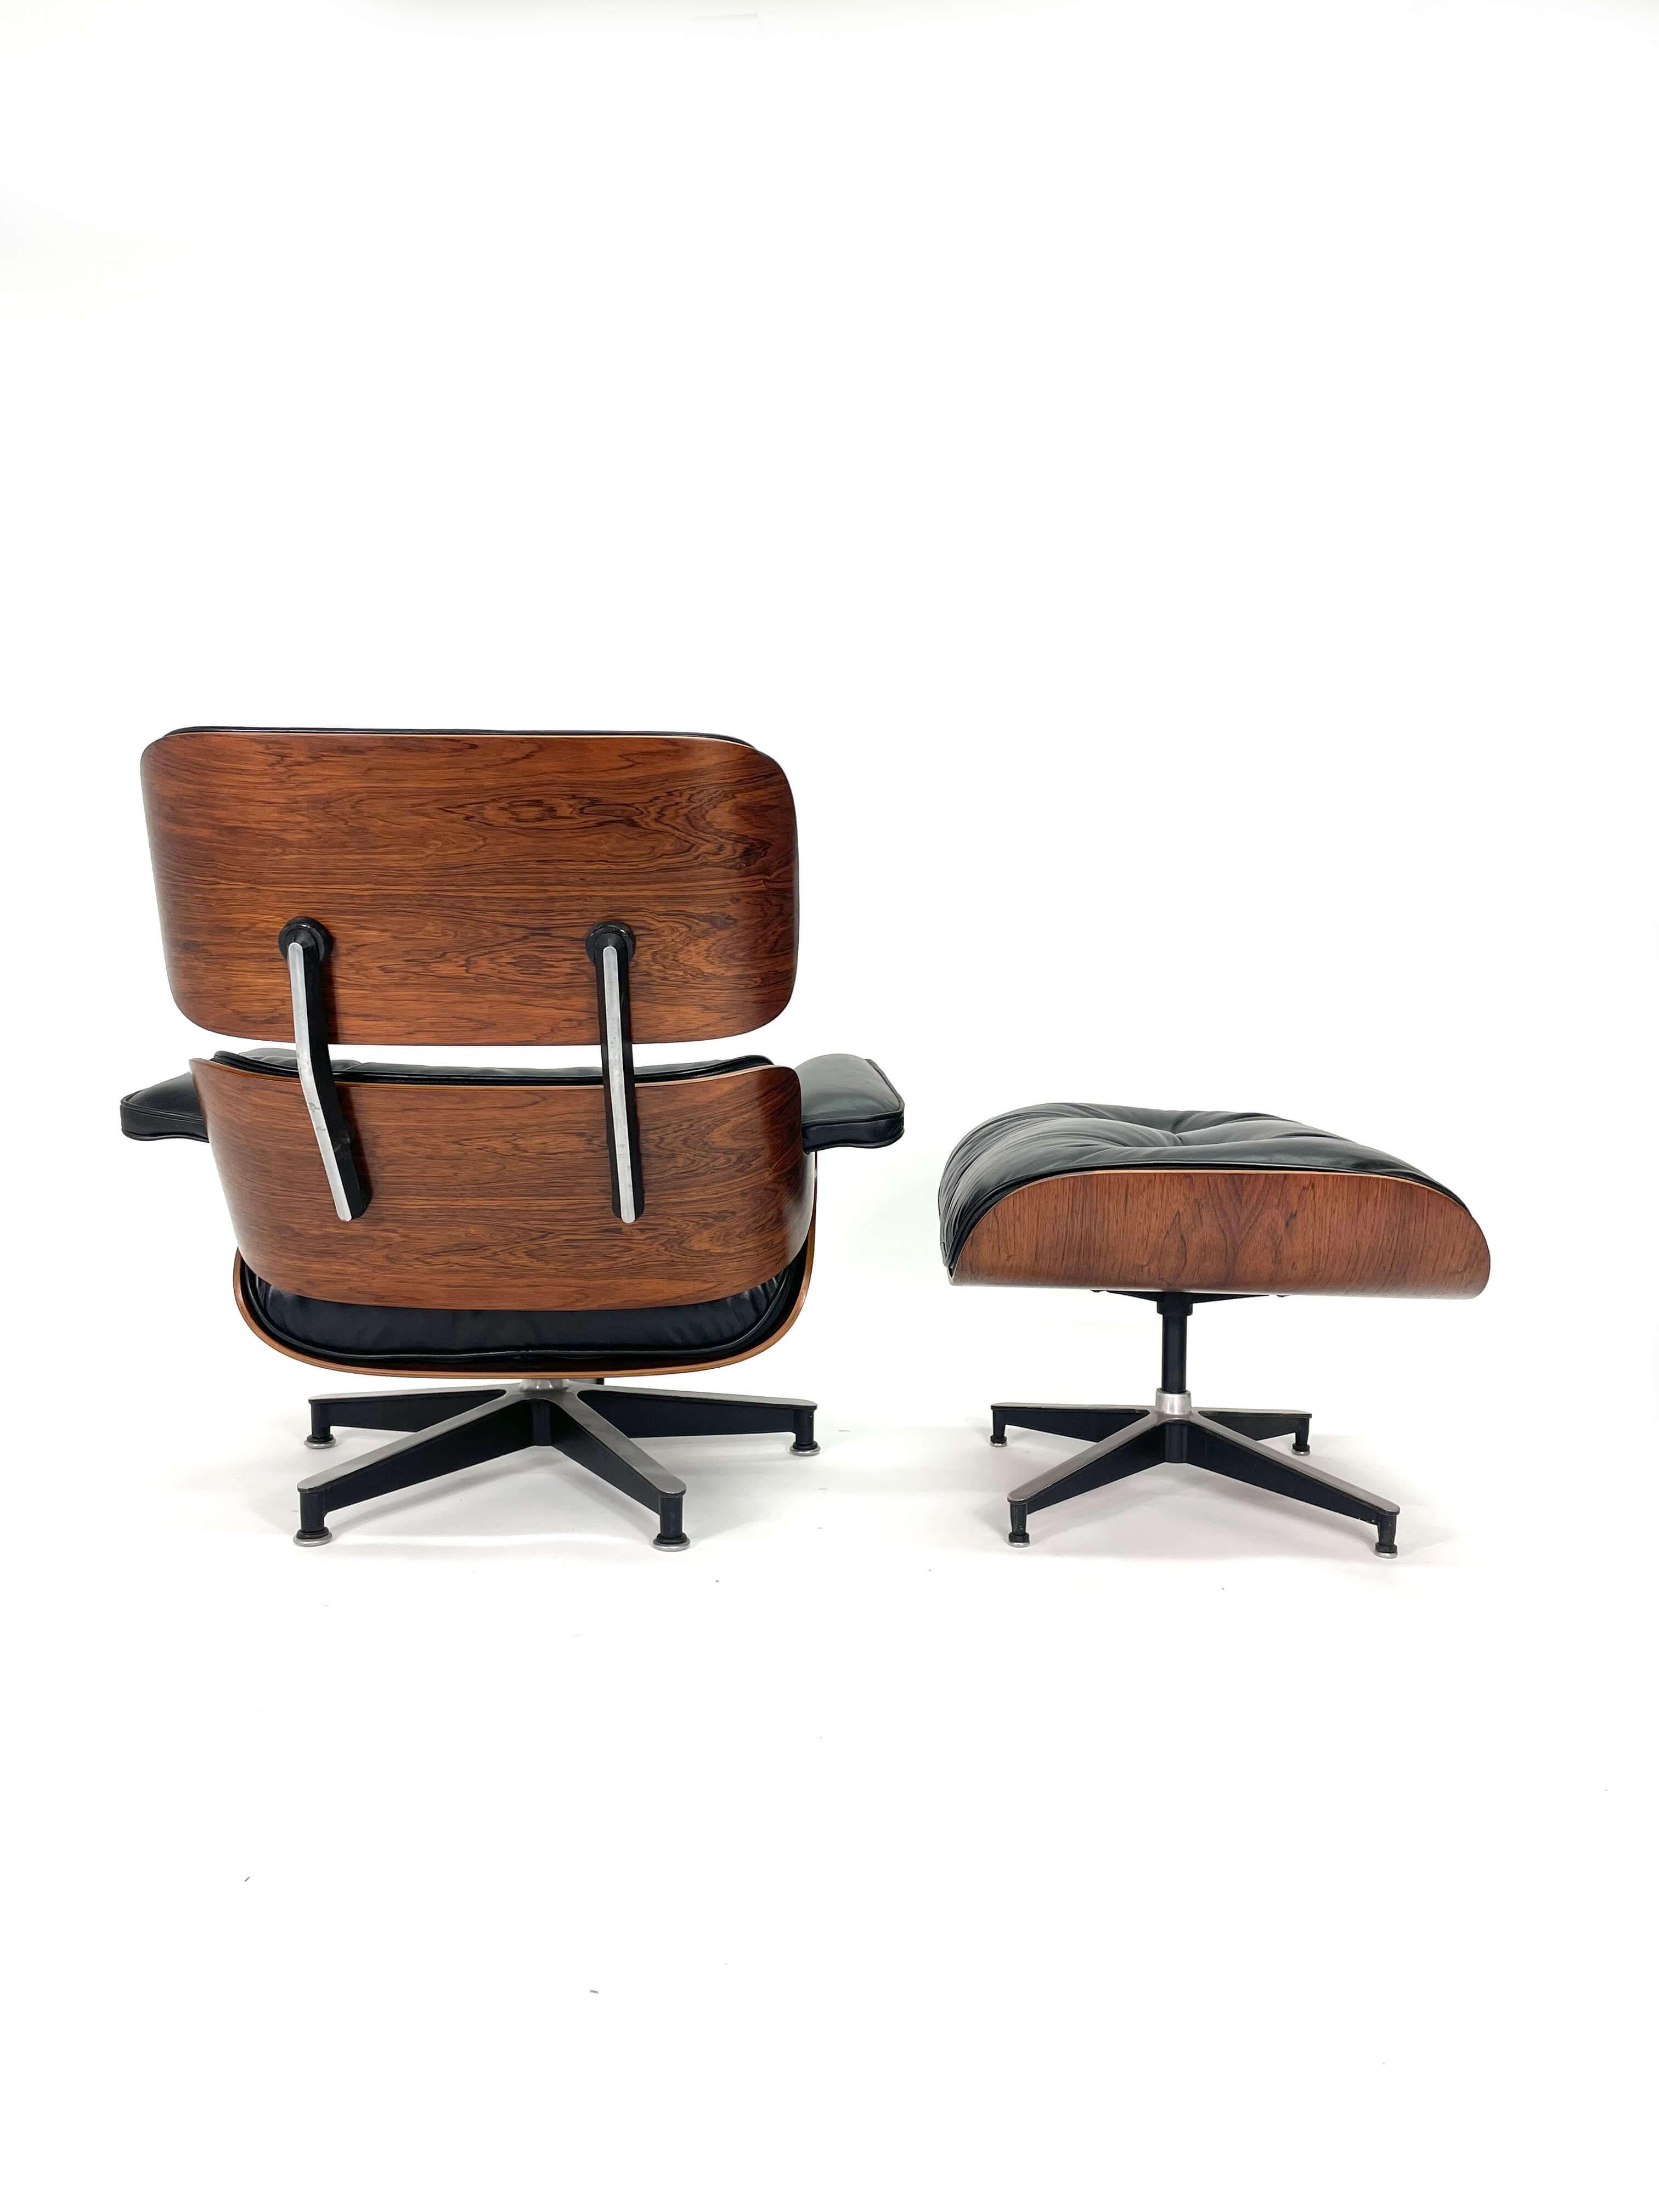 2nd Generation Eames Lounge Chair and Ottoman in Rosewood, Circa 1960's 1